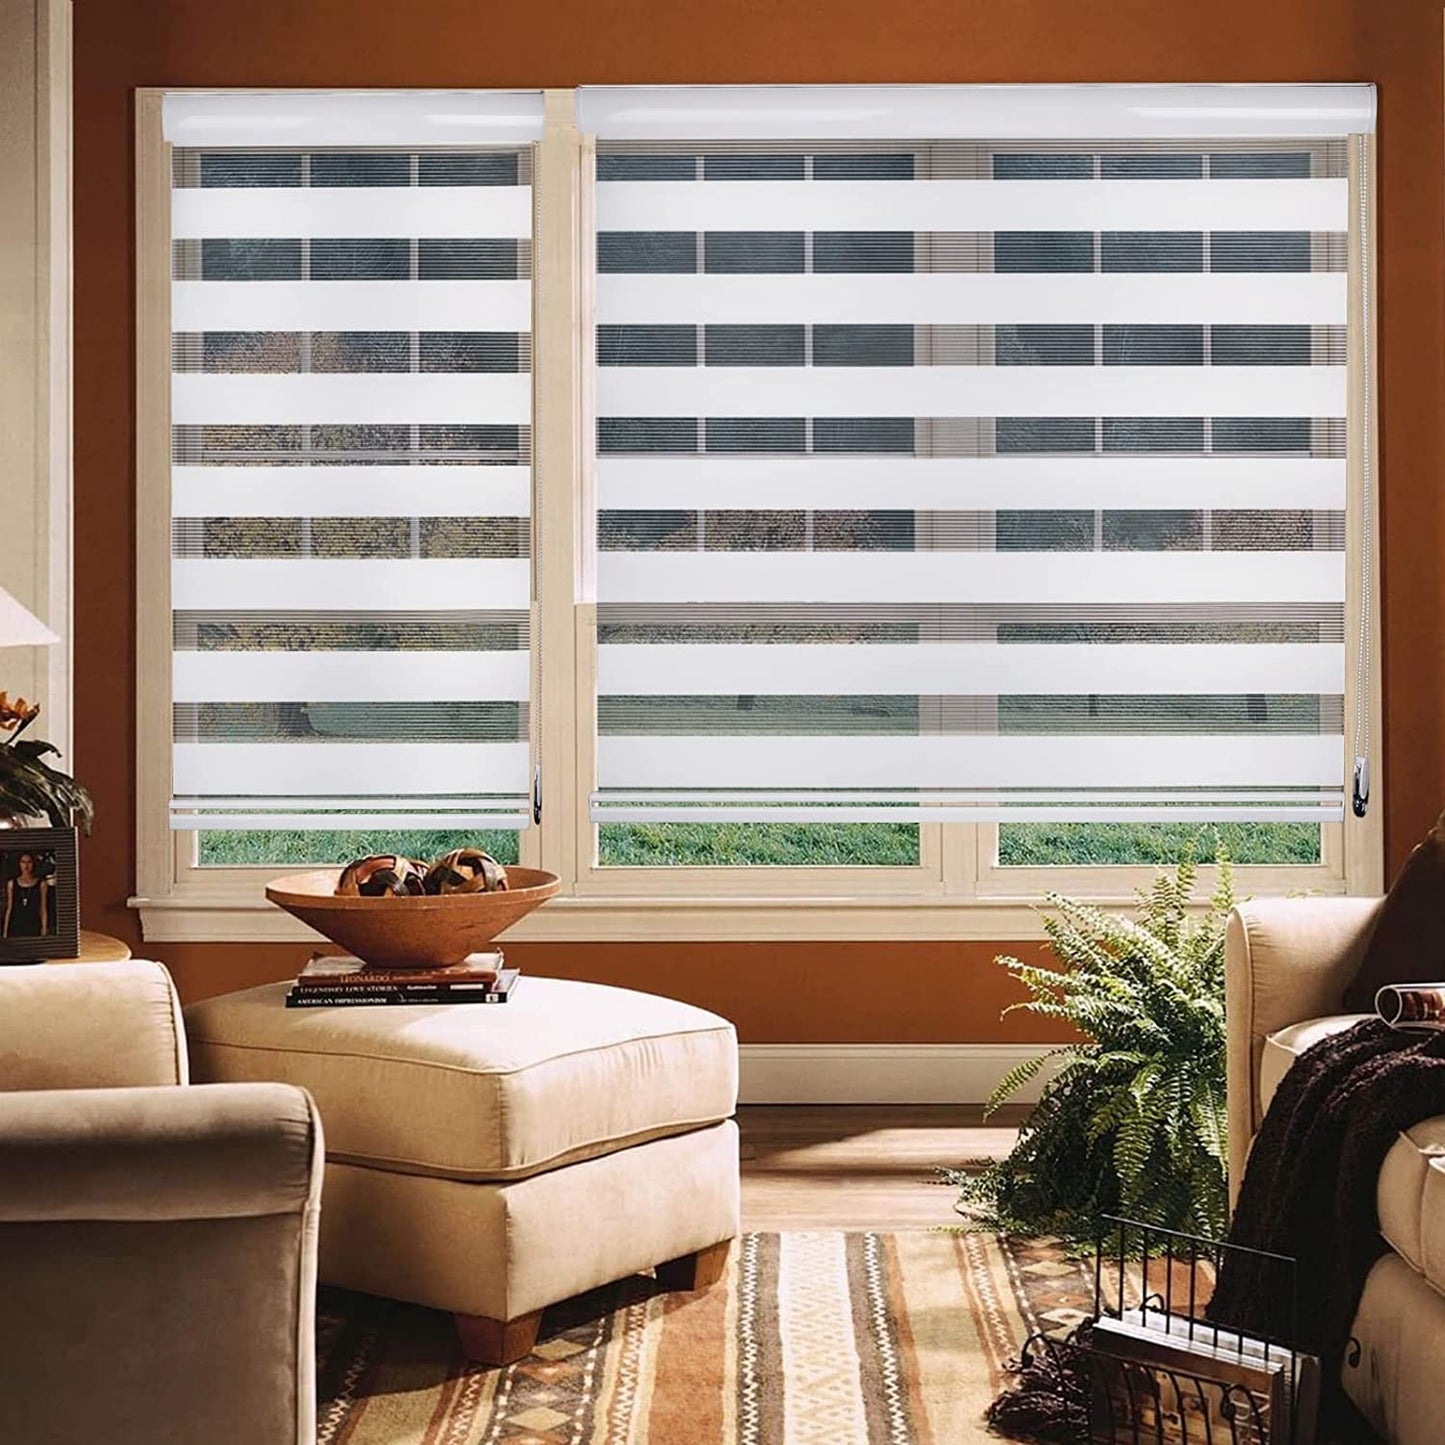 New 24”x72” Zebra Blinds for Windows, Dual Layer Roller Shades, Window Shades for Light Filtering and Privacy Light Control for Day and Night, Shades and Blinds for Indoor Windows (White 21''x72'')